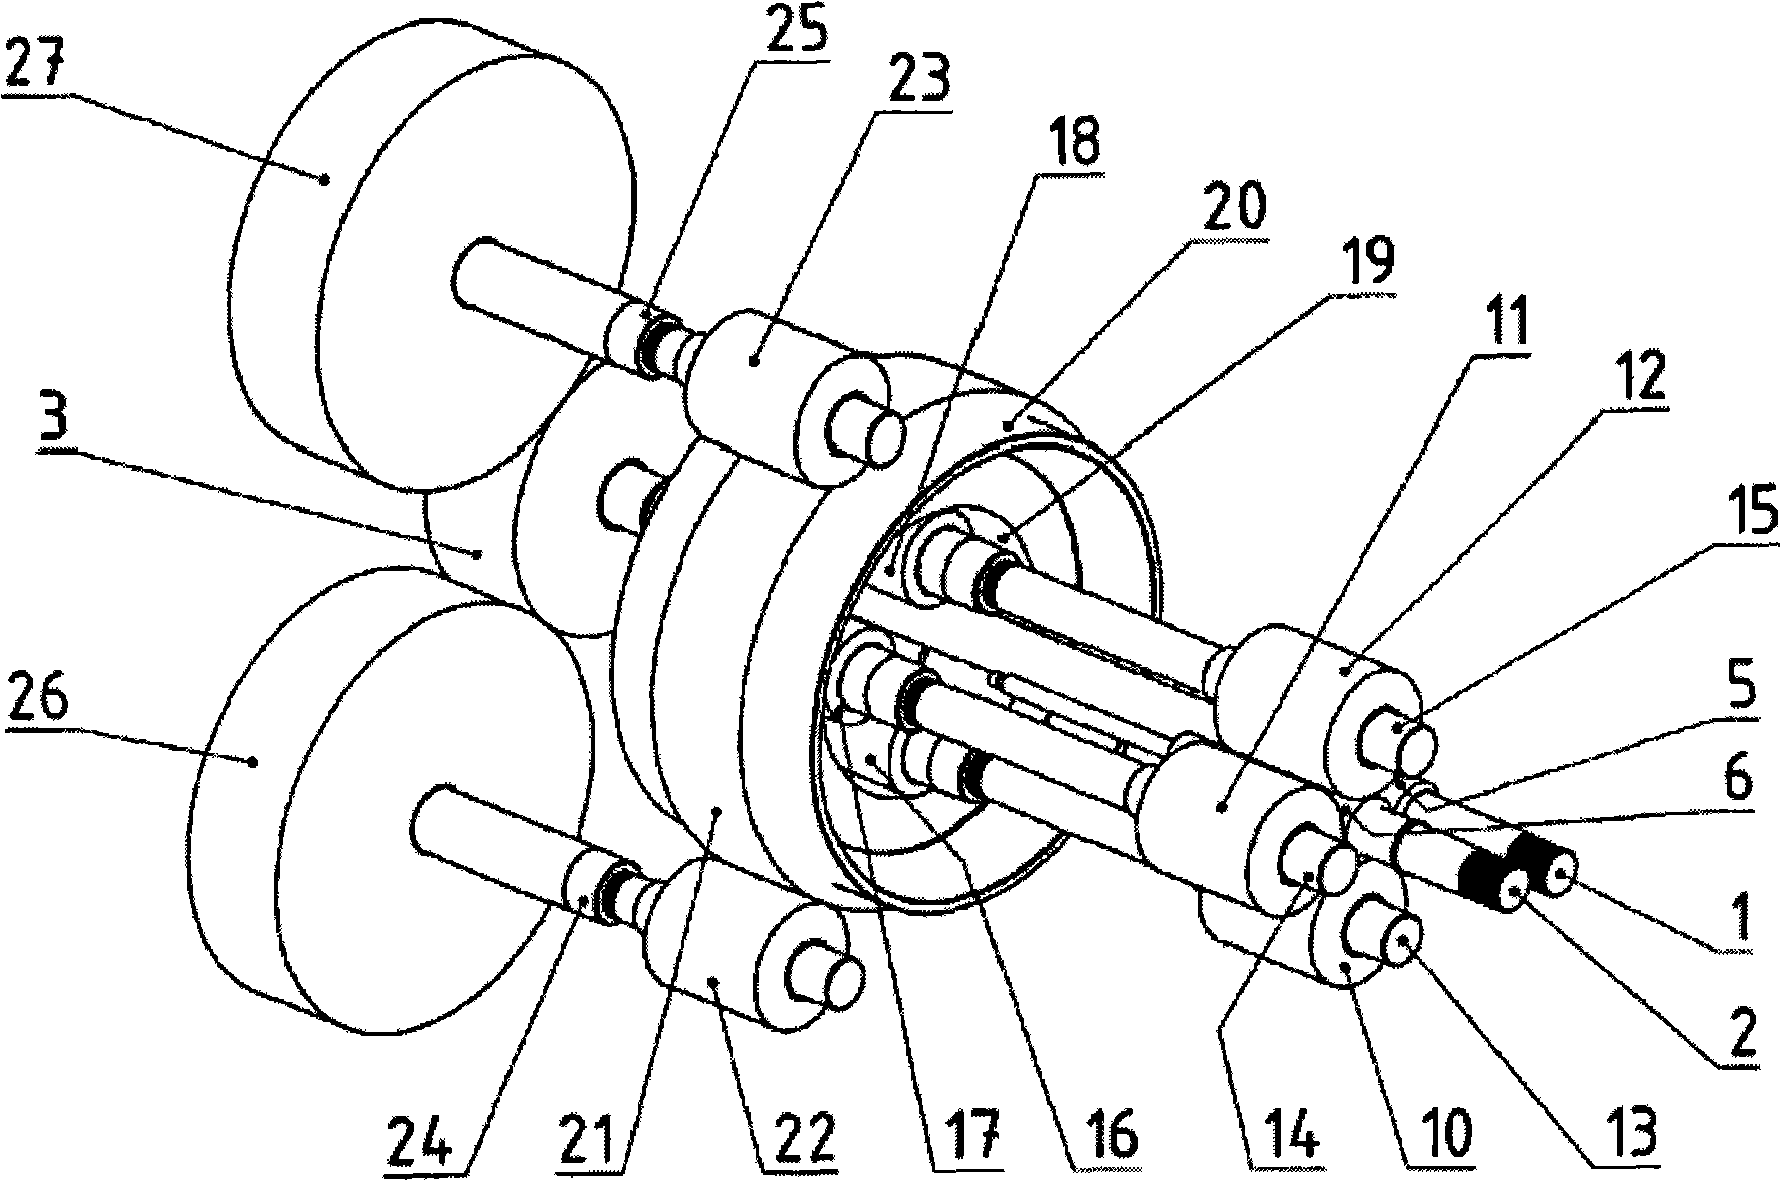 Gear system for a twin-screw extruder